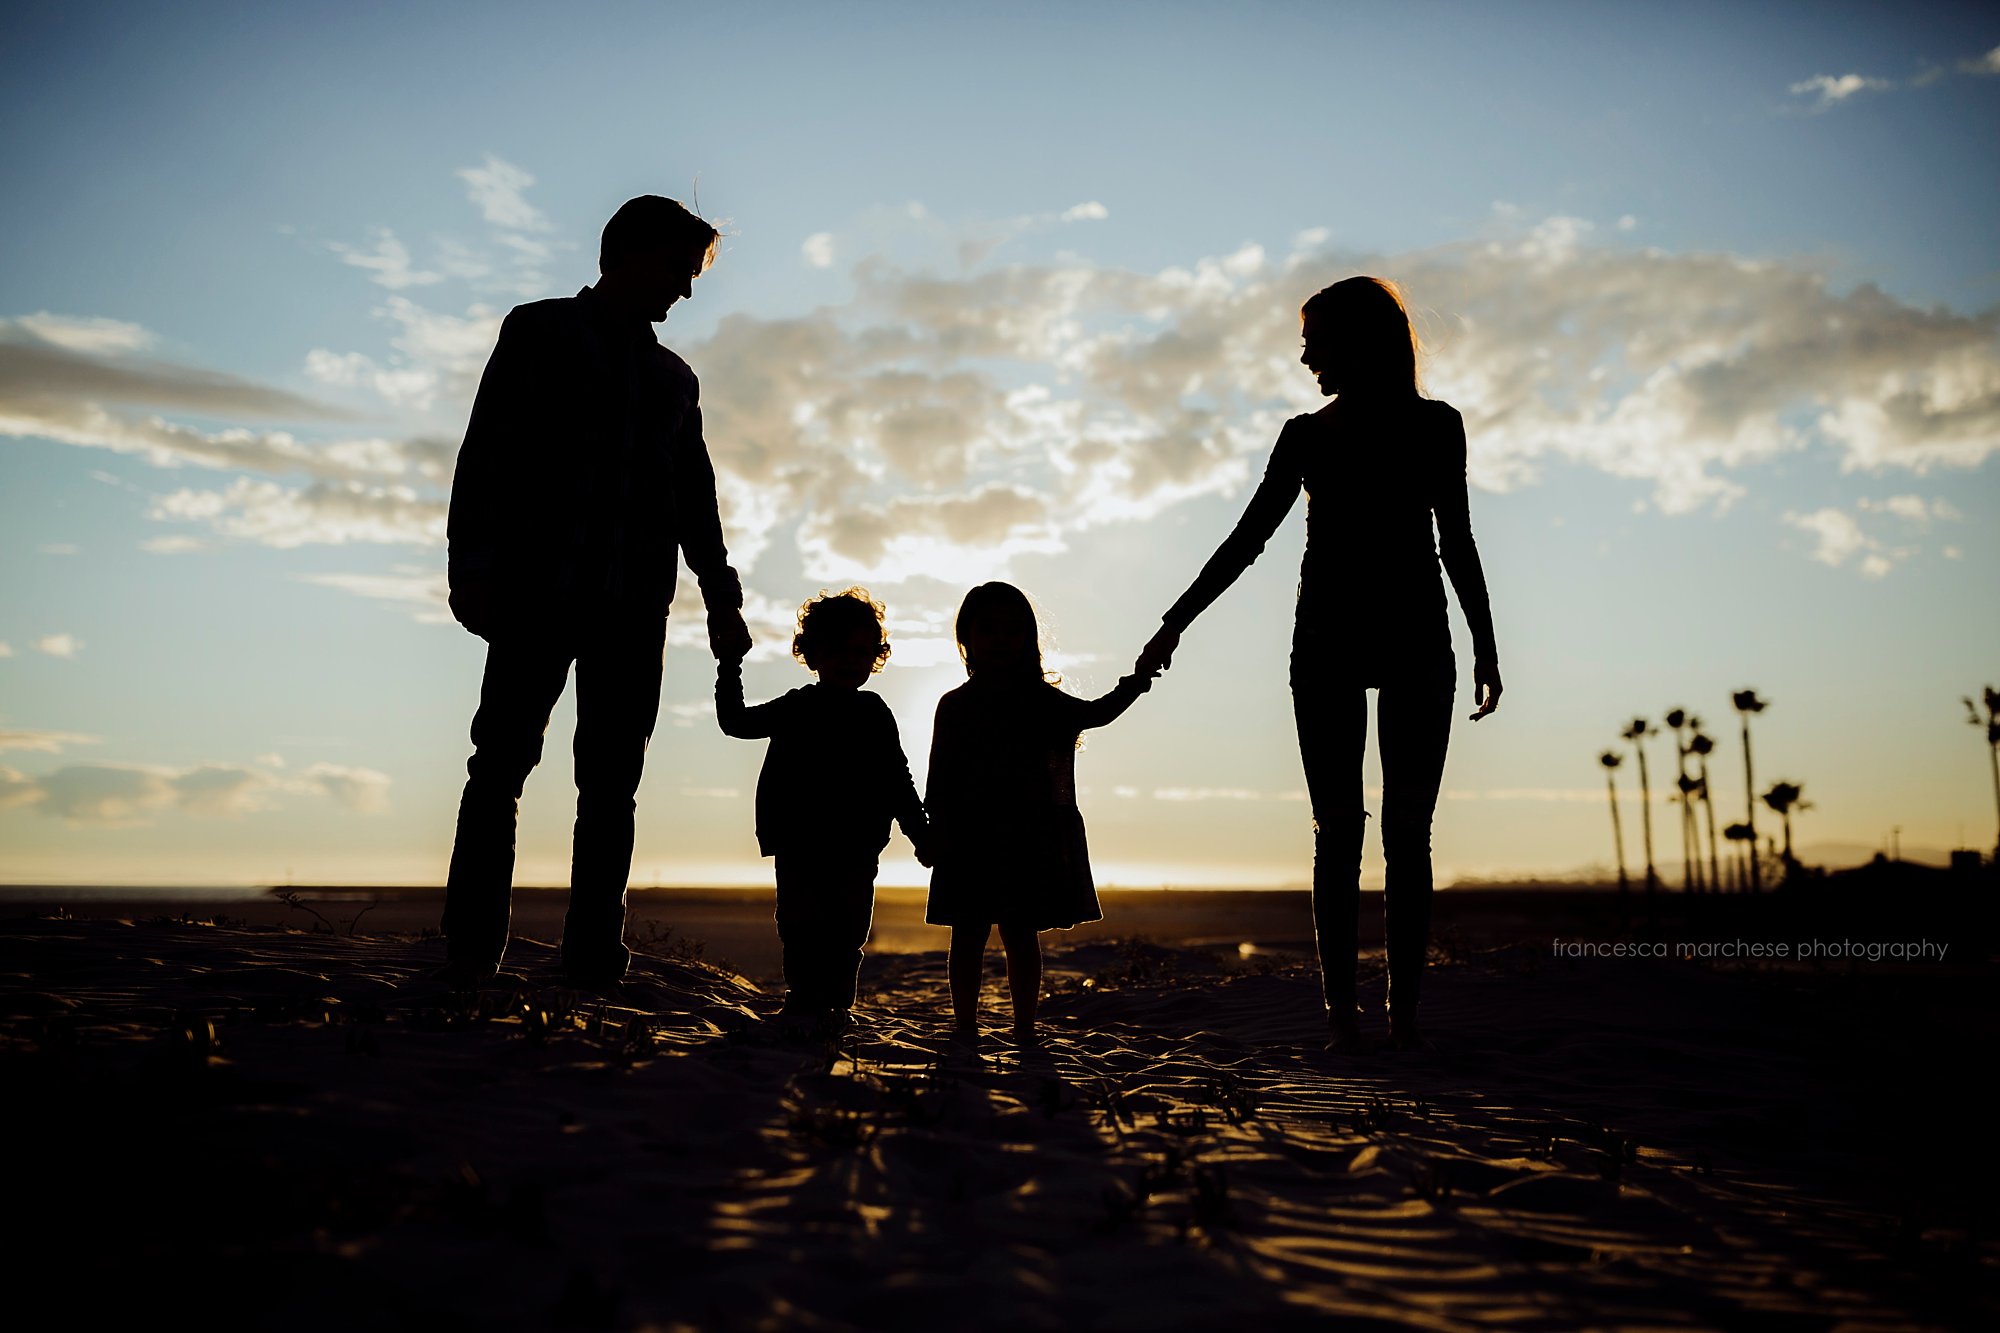 family of 4 silhouette - Francesca Marchese Photography Orange County beach family golden hour session